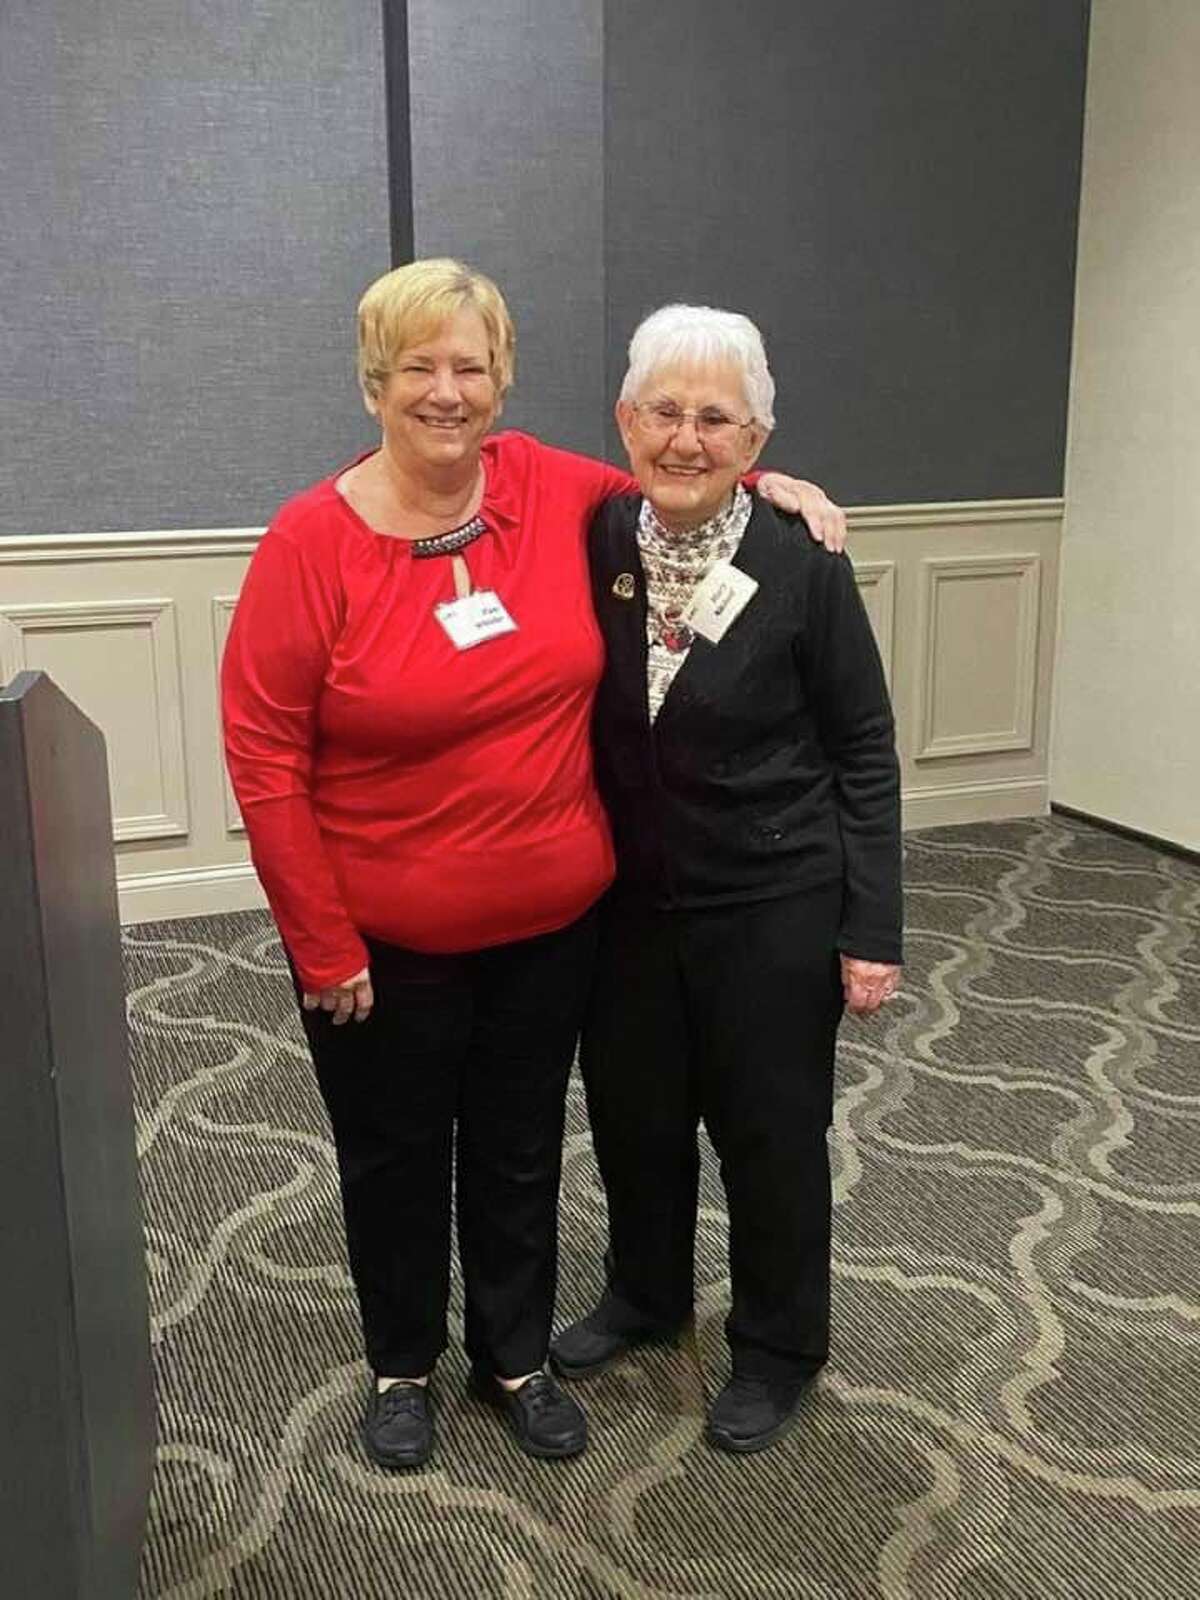 Treasurer Pam Whisler with 2nd Vice President Mary Nickell, who was recognized for 10 years of service at the club.